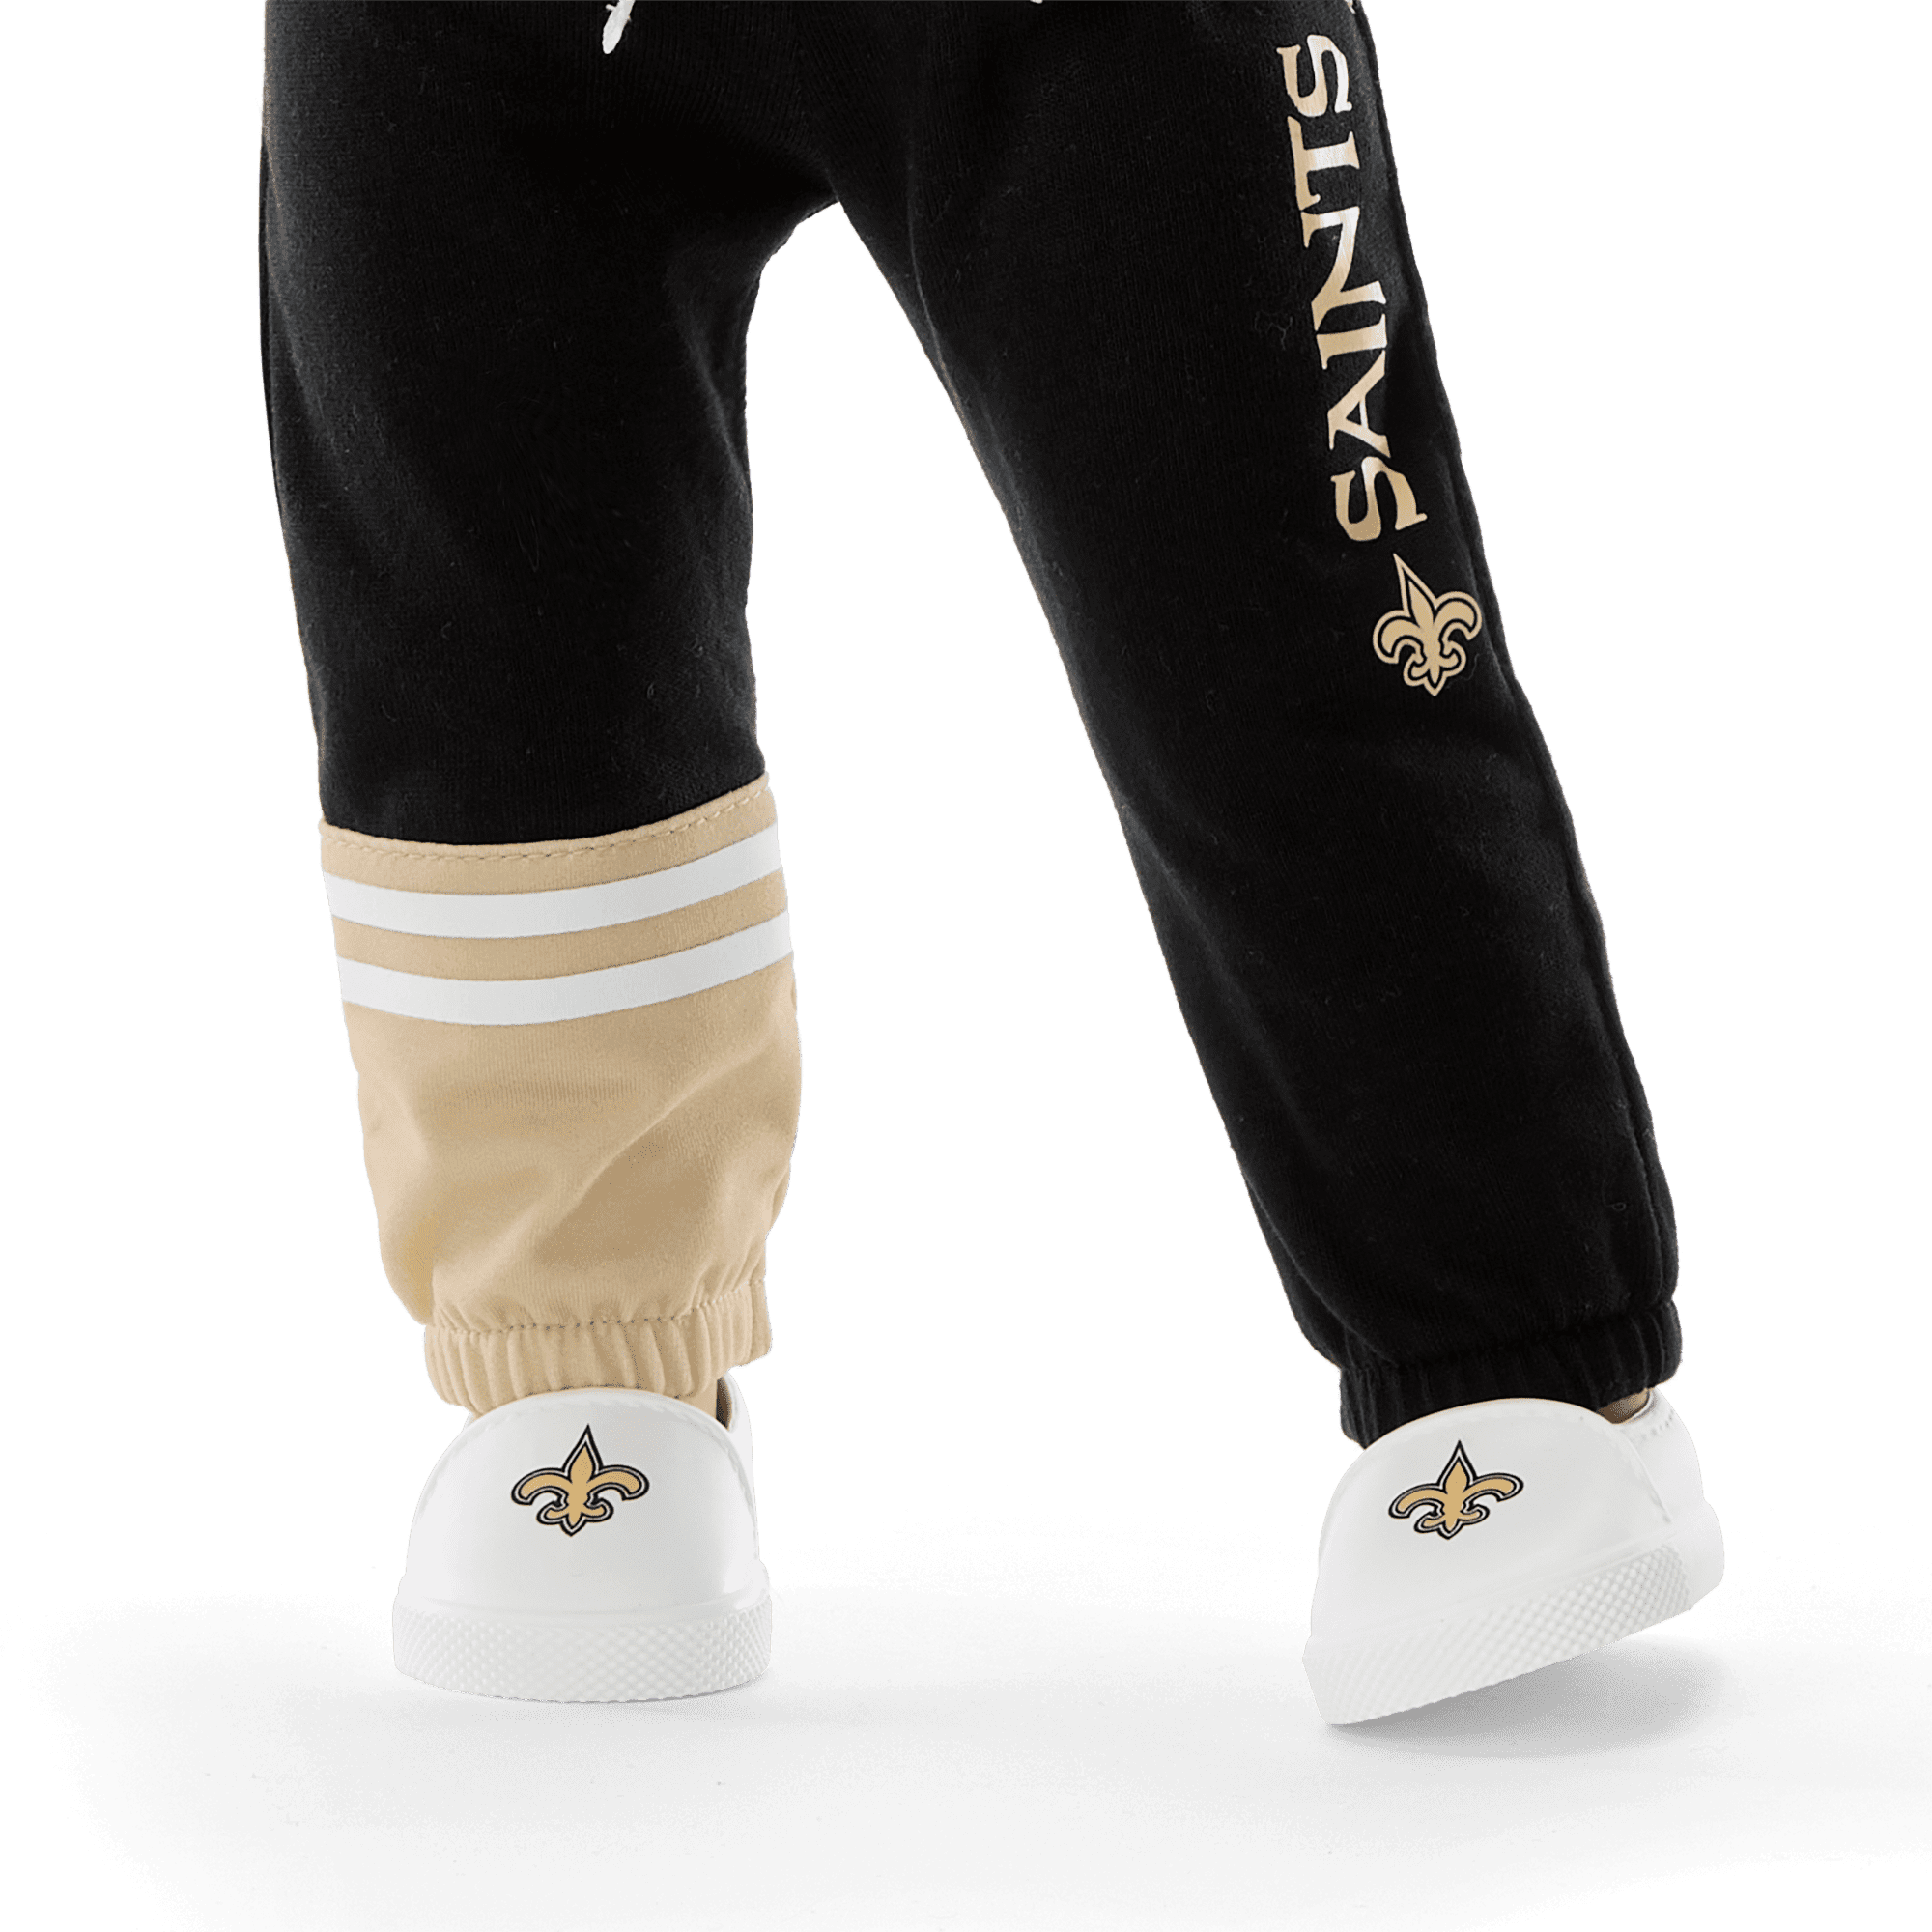 American Girl® x NFL New Orleans Saints Fan Outfit & Accessories for 18-inch Dolls